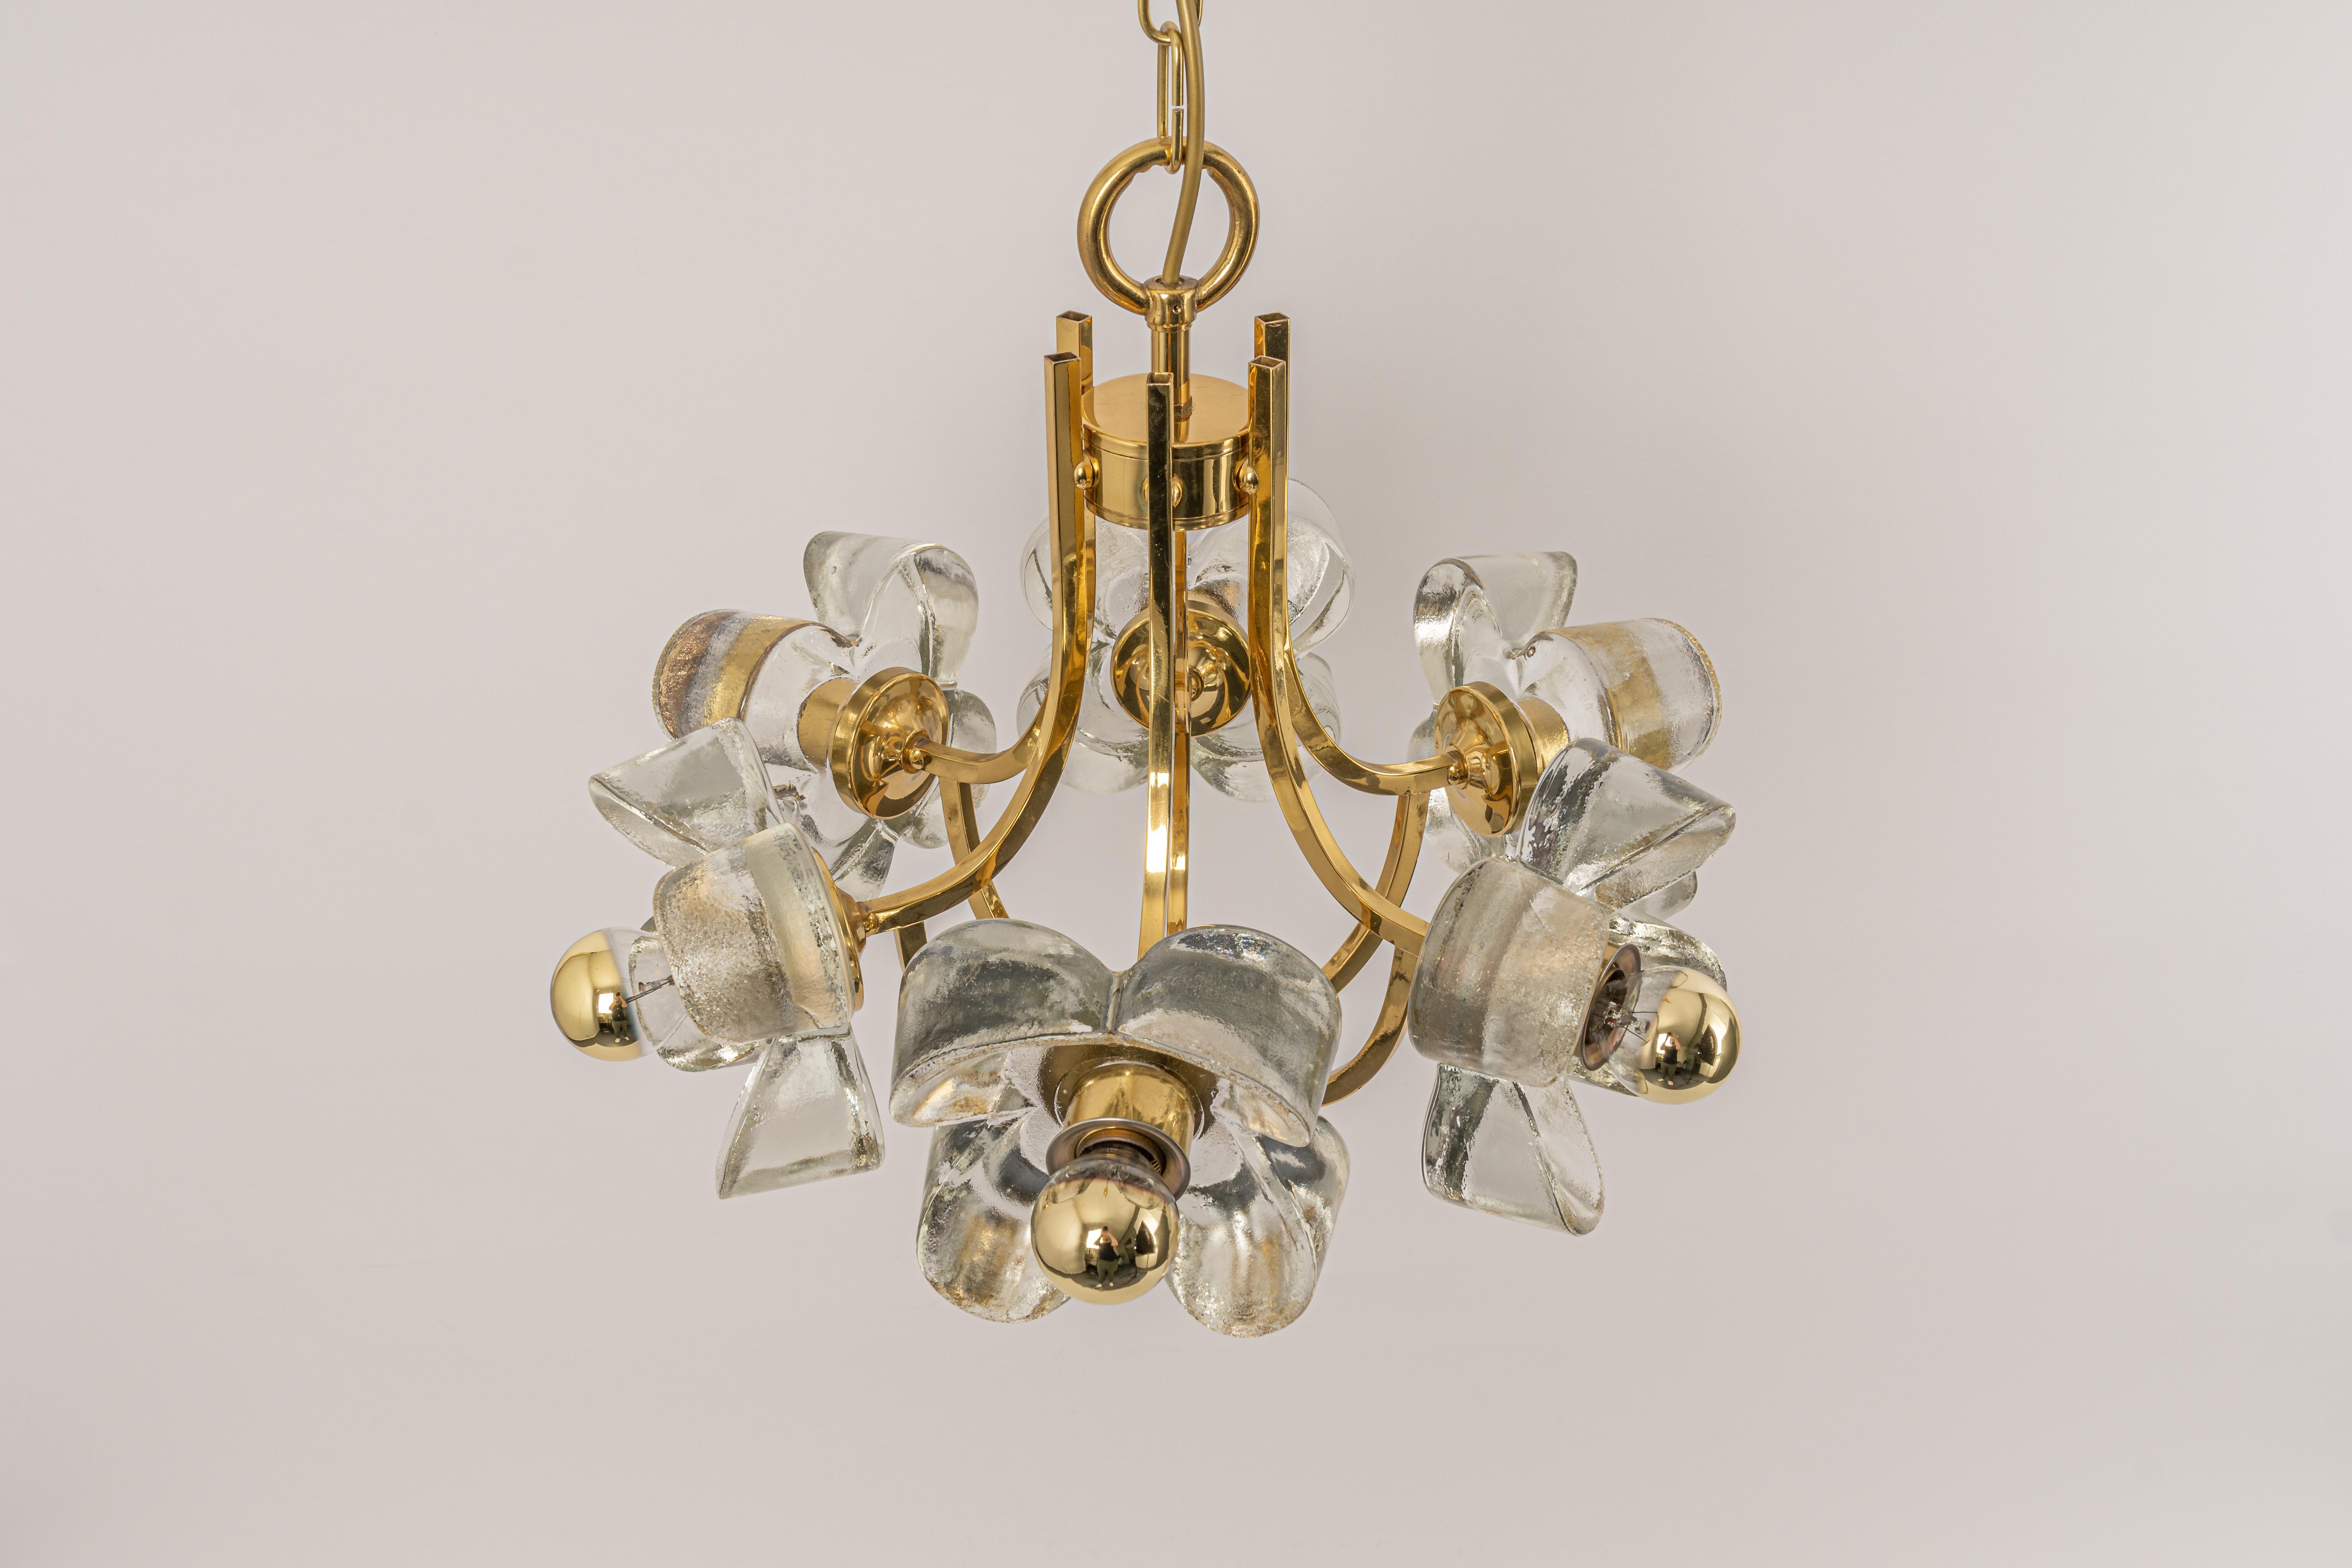 1 of 2 Large Brass and Crystal Glass Pendant by Sische, Germany, 1970s For Sale 1